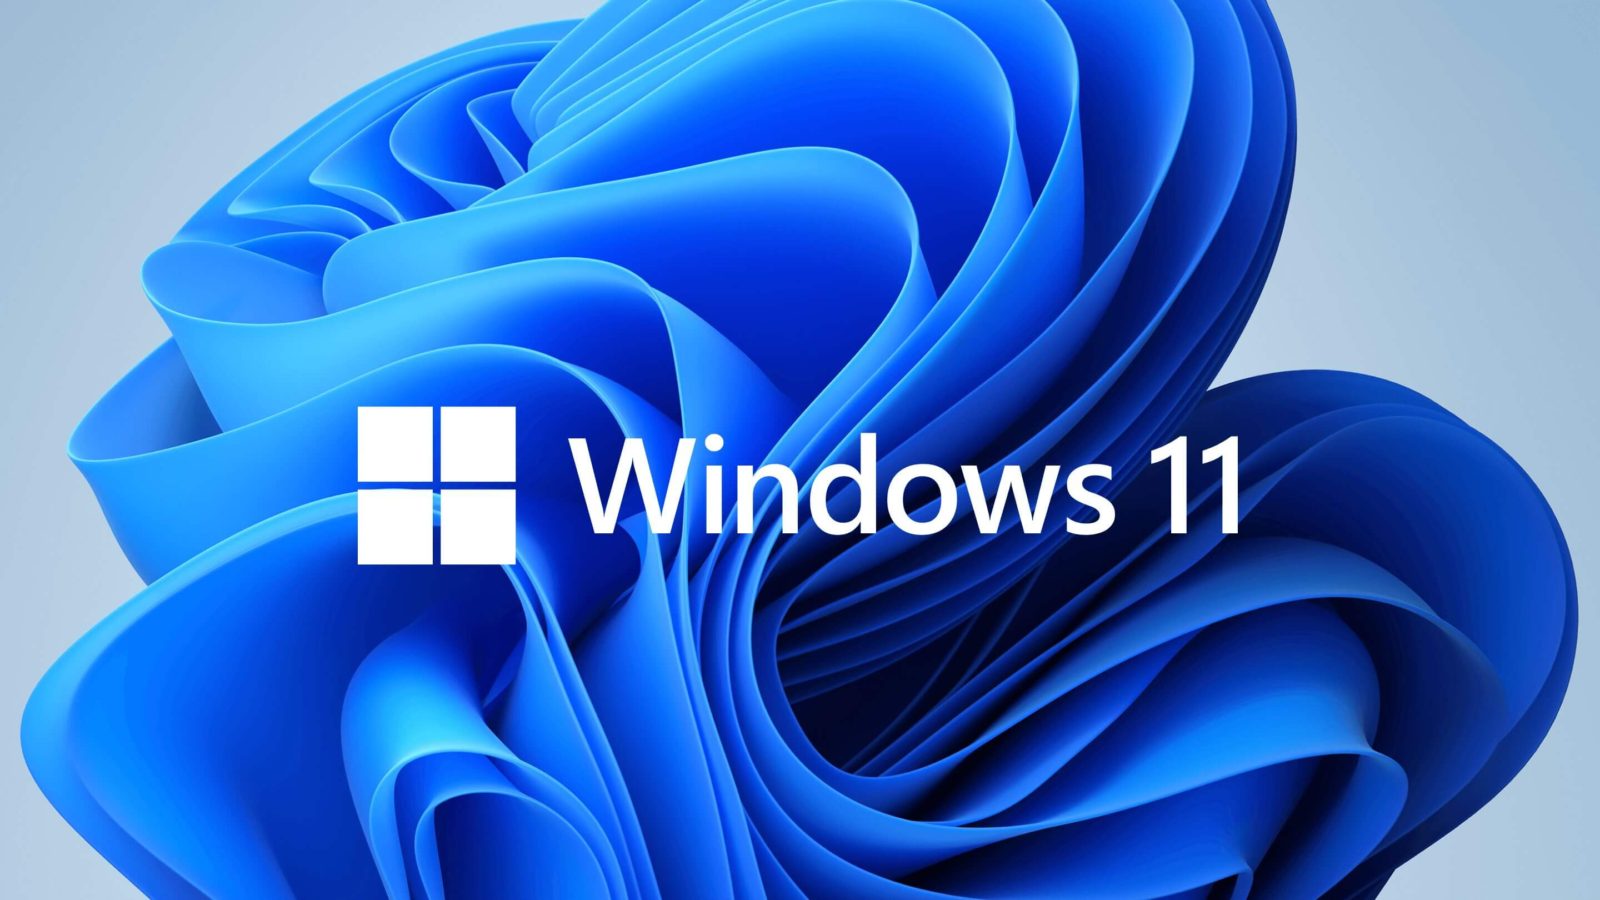 Download Windows 11 on Your PC